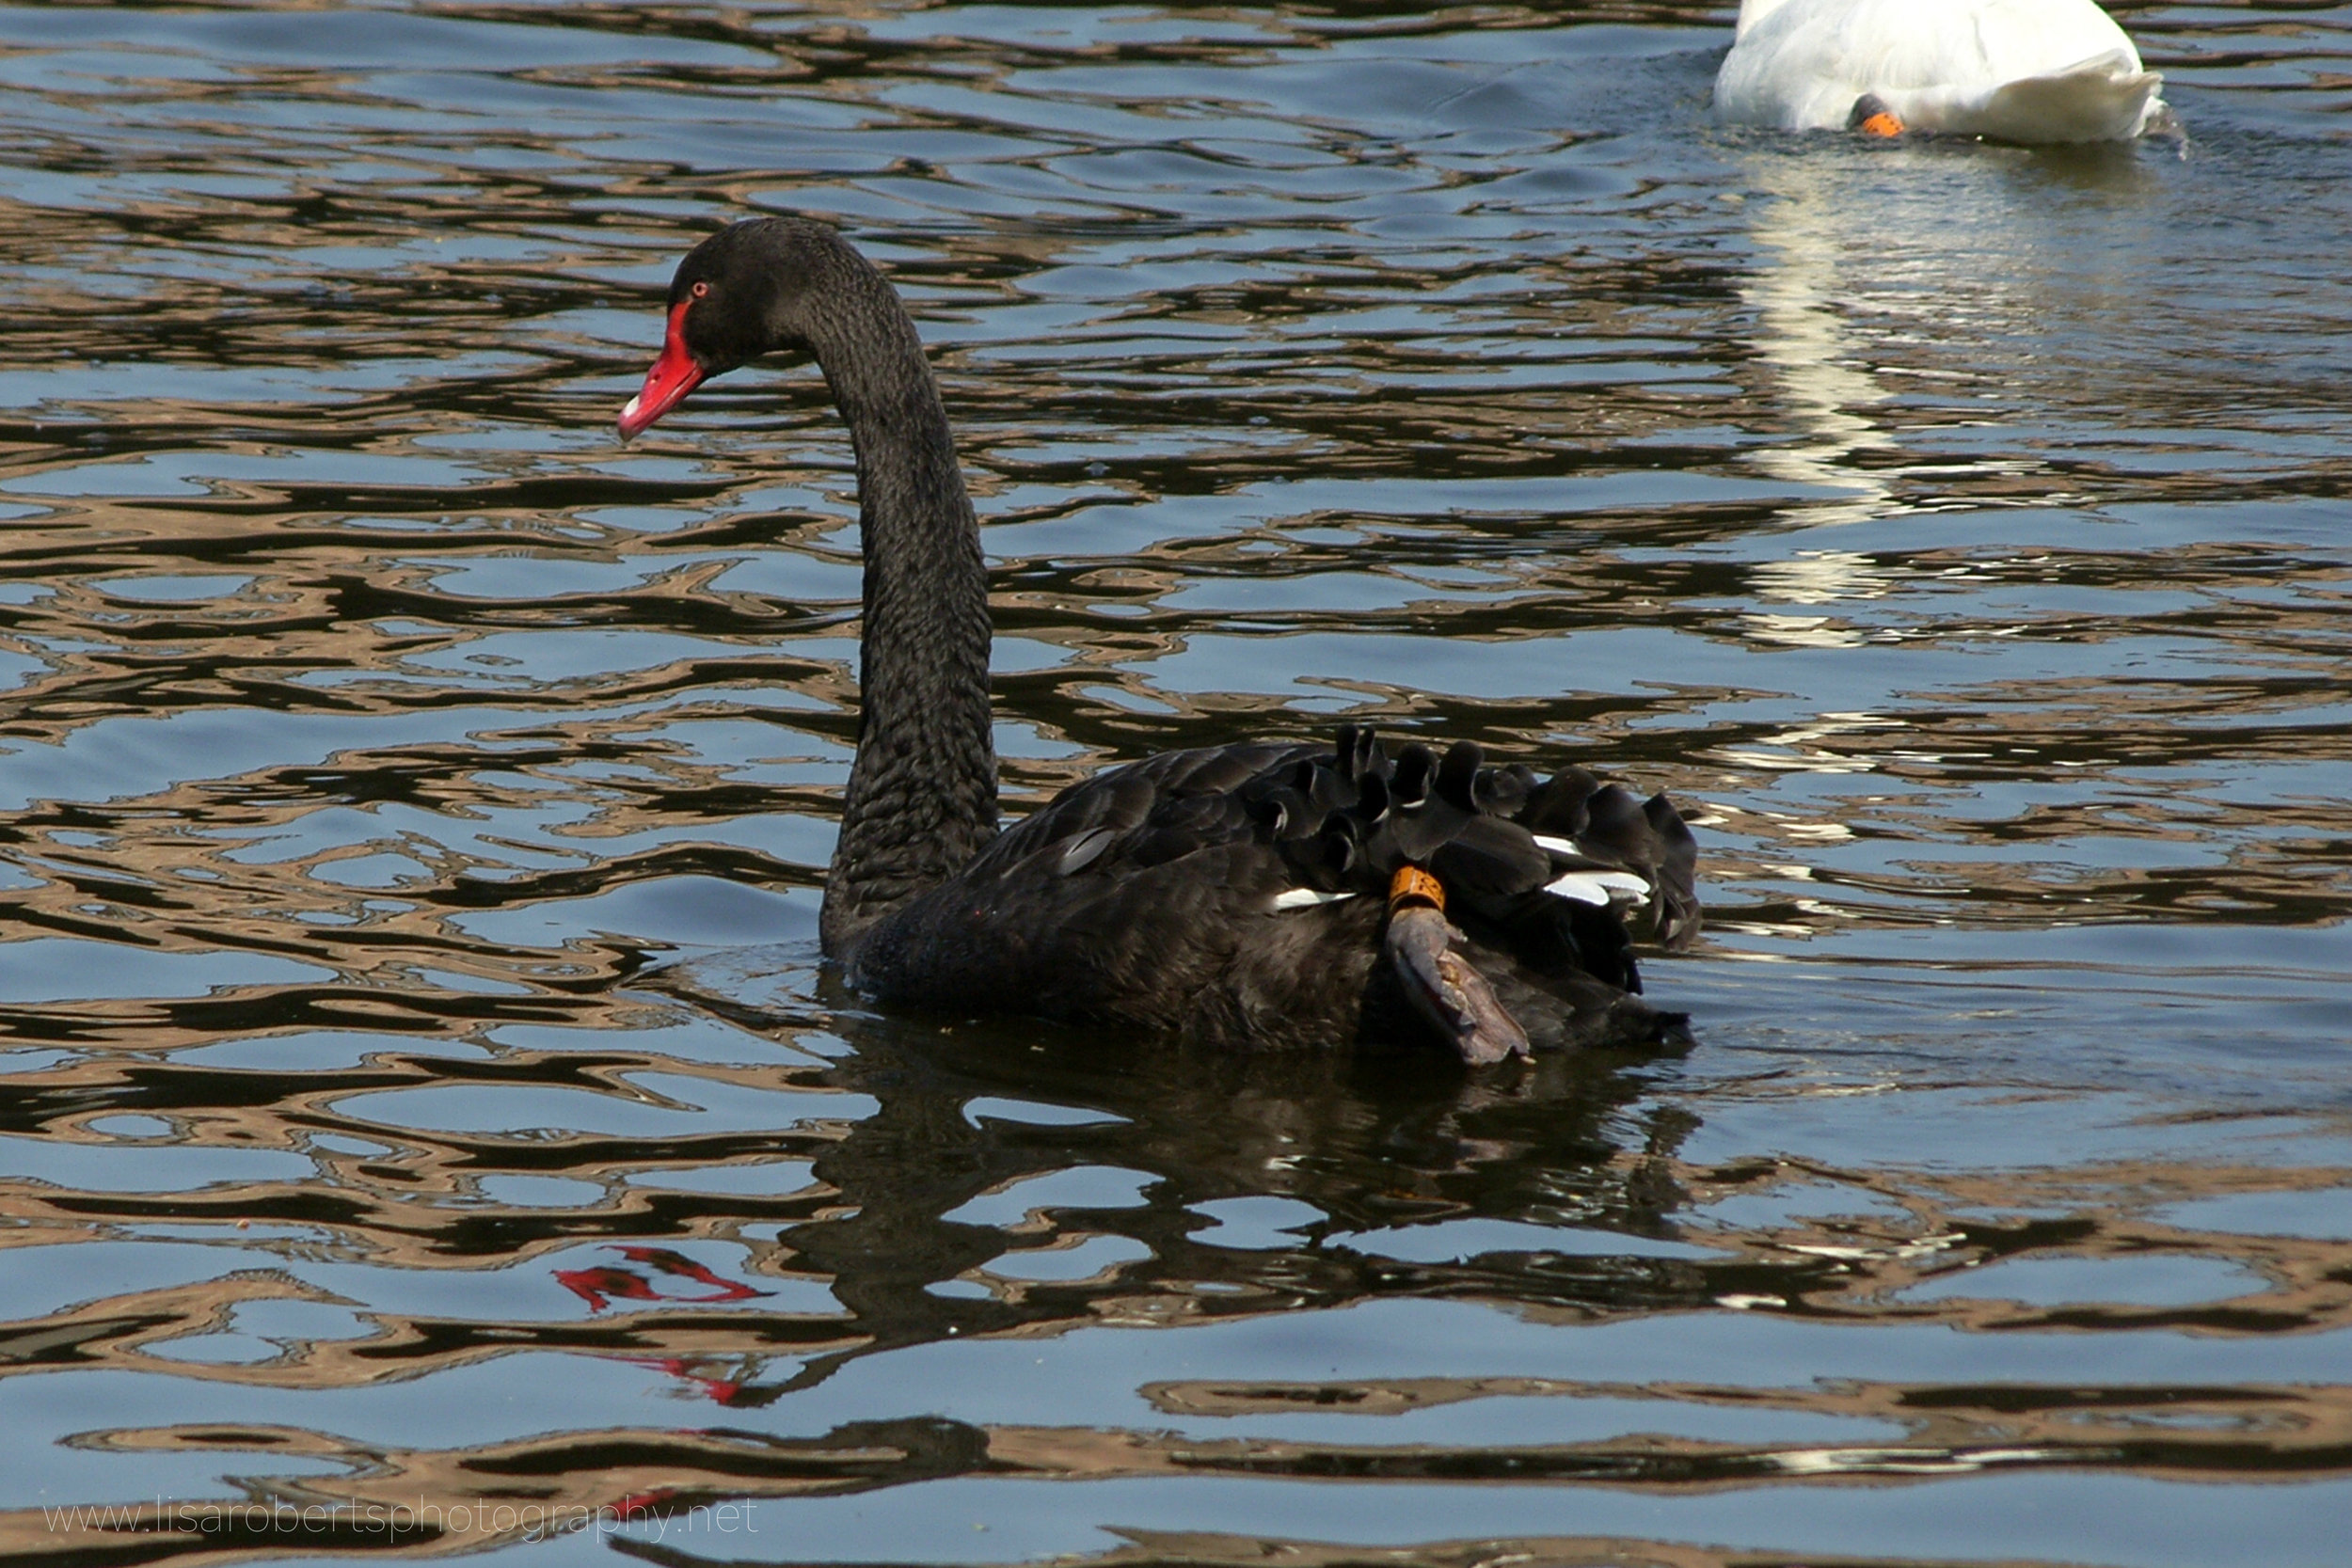  Black Swan on the River Severn 